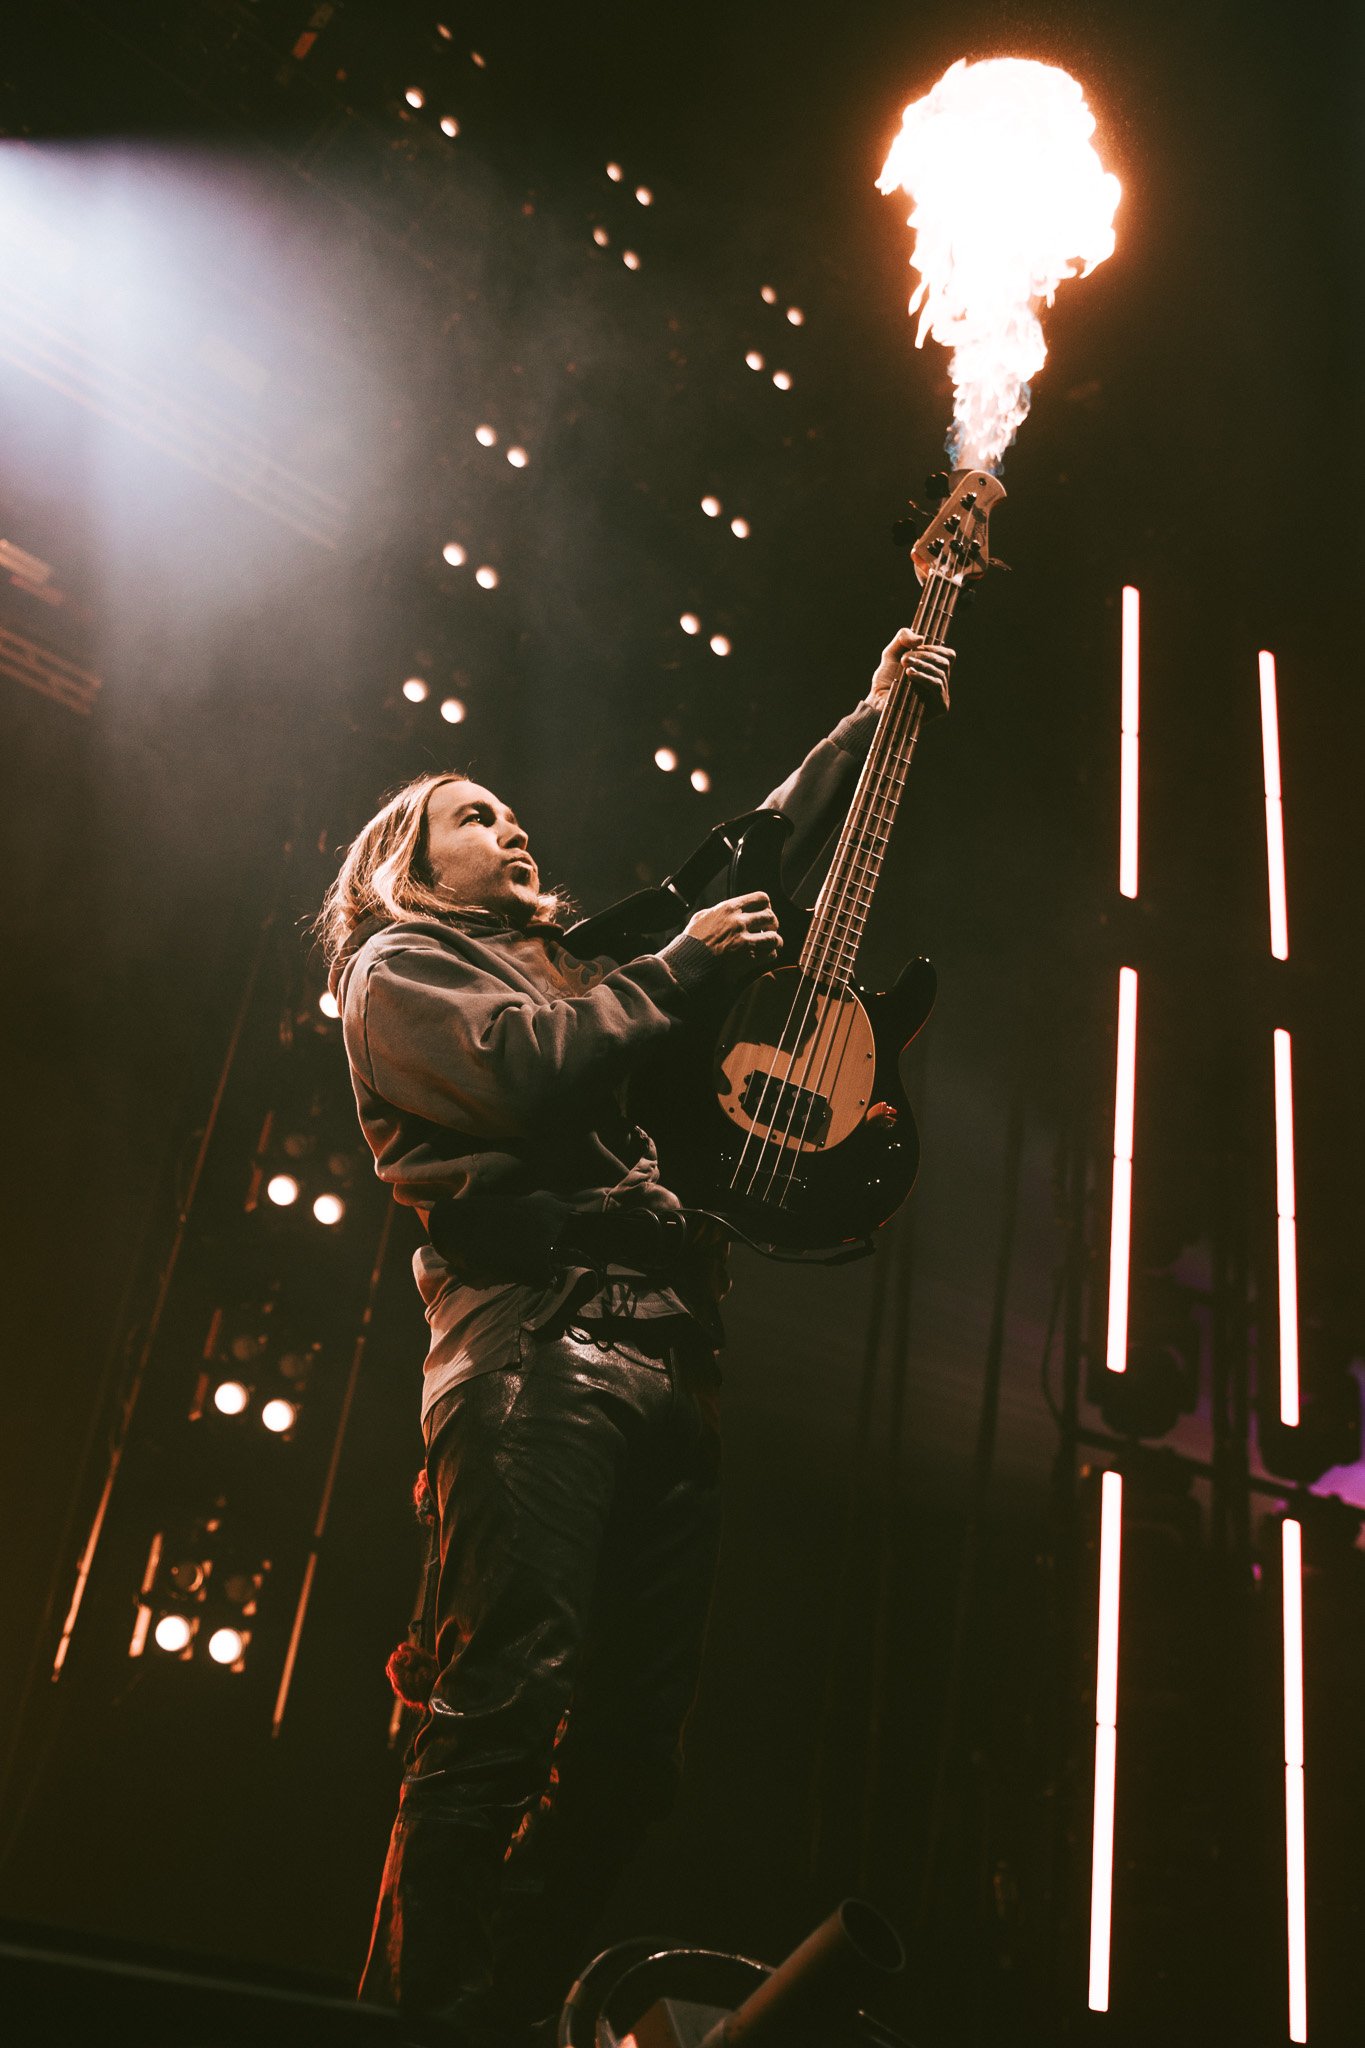  Fall Out Boy bassist Pete Wentz performs with a fiery bass. 